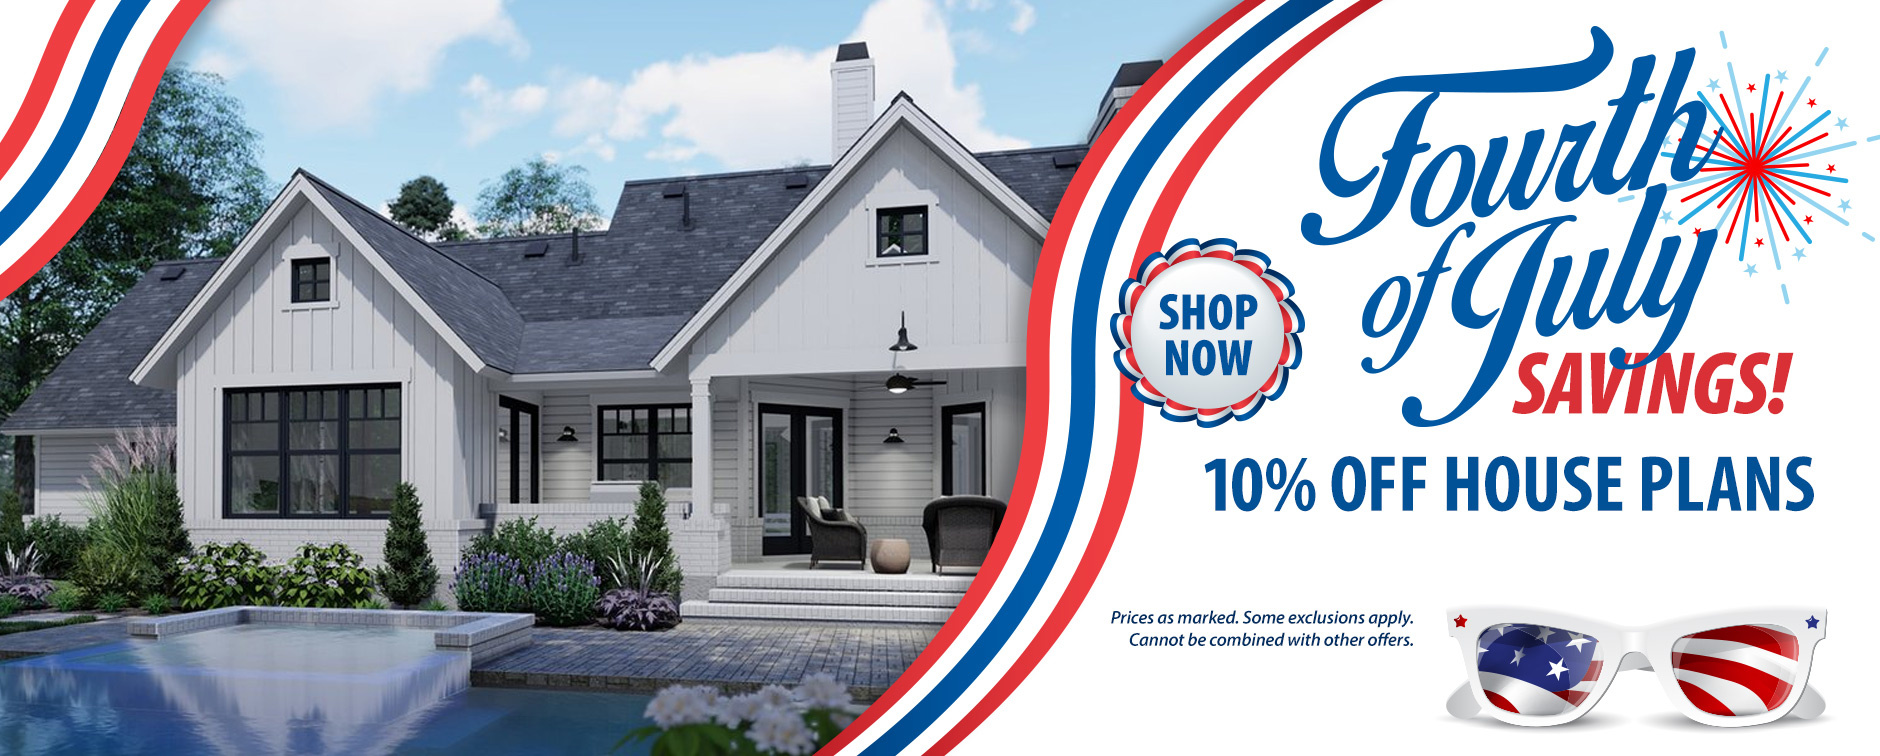 Take 10% Off House Plans